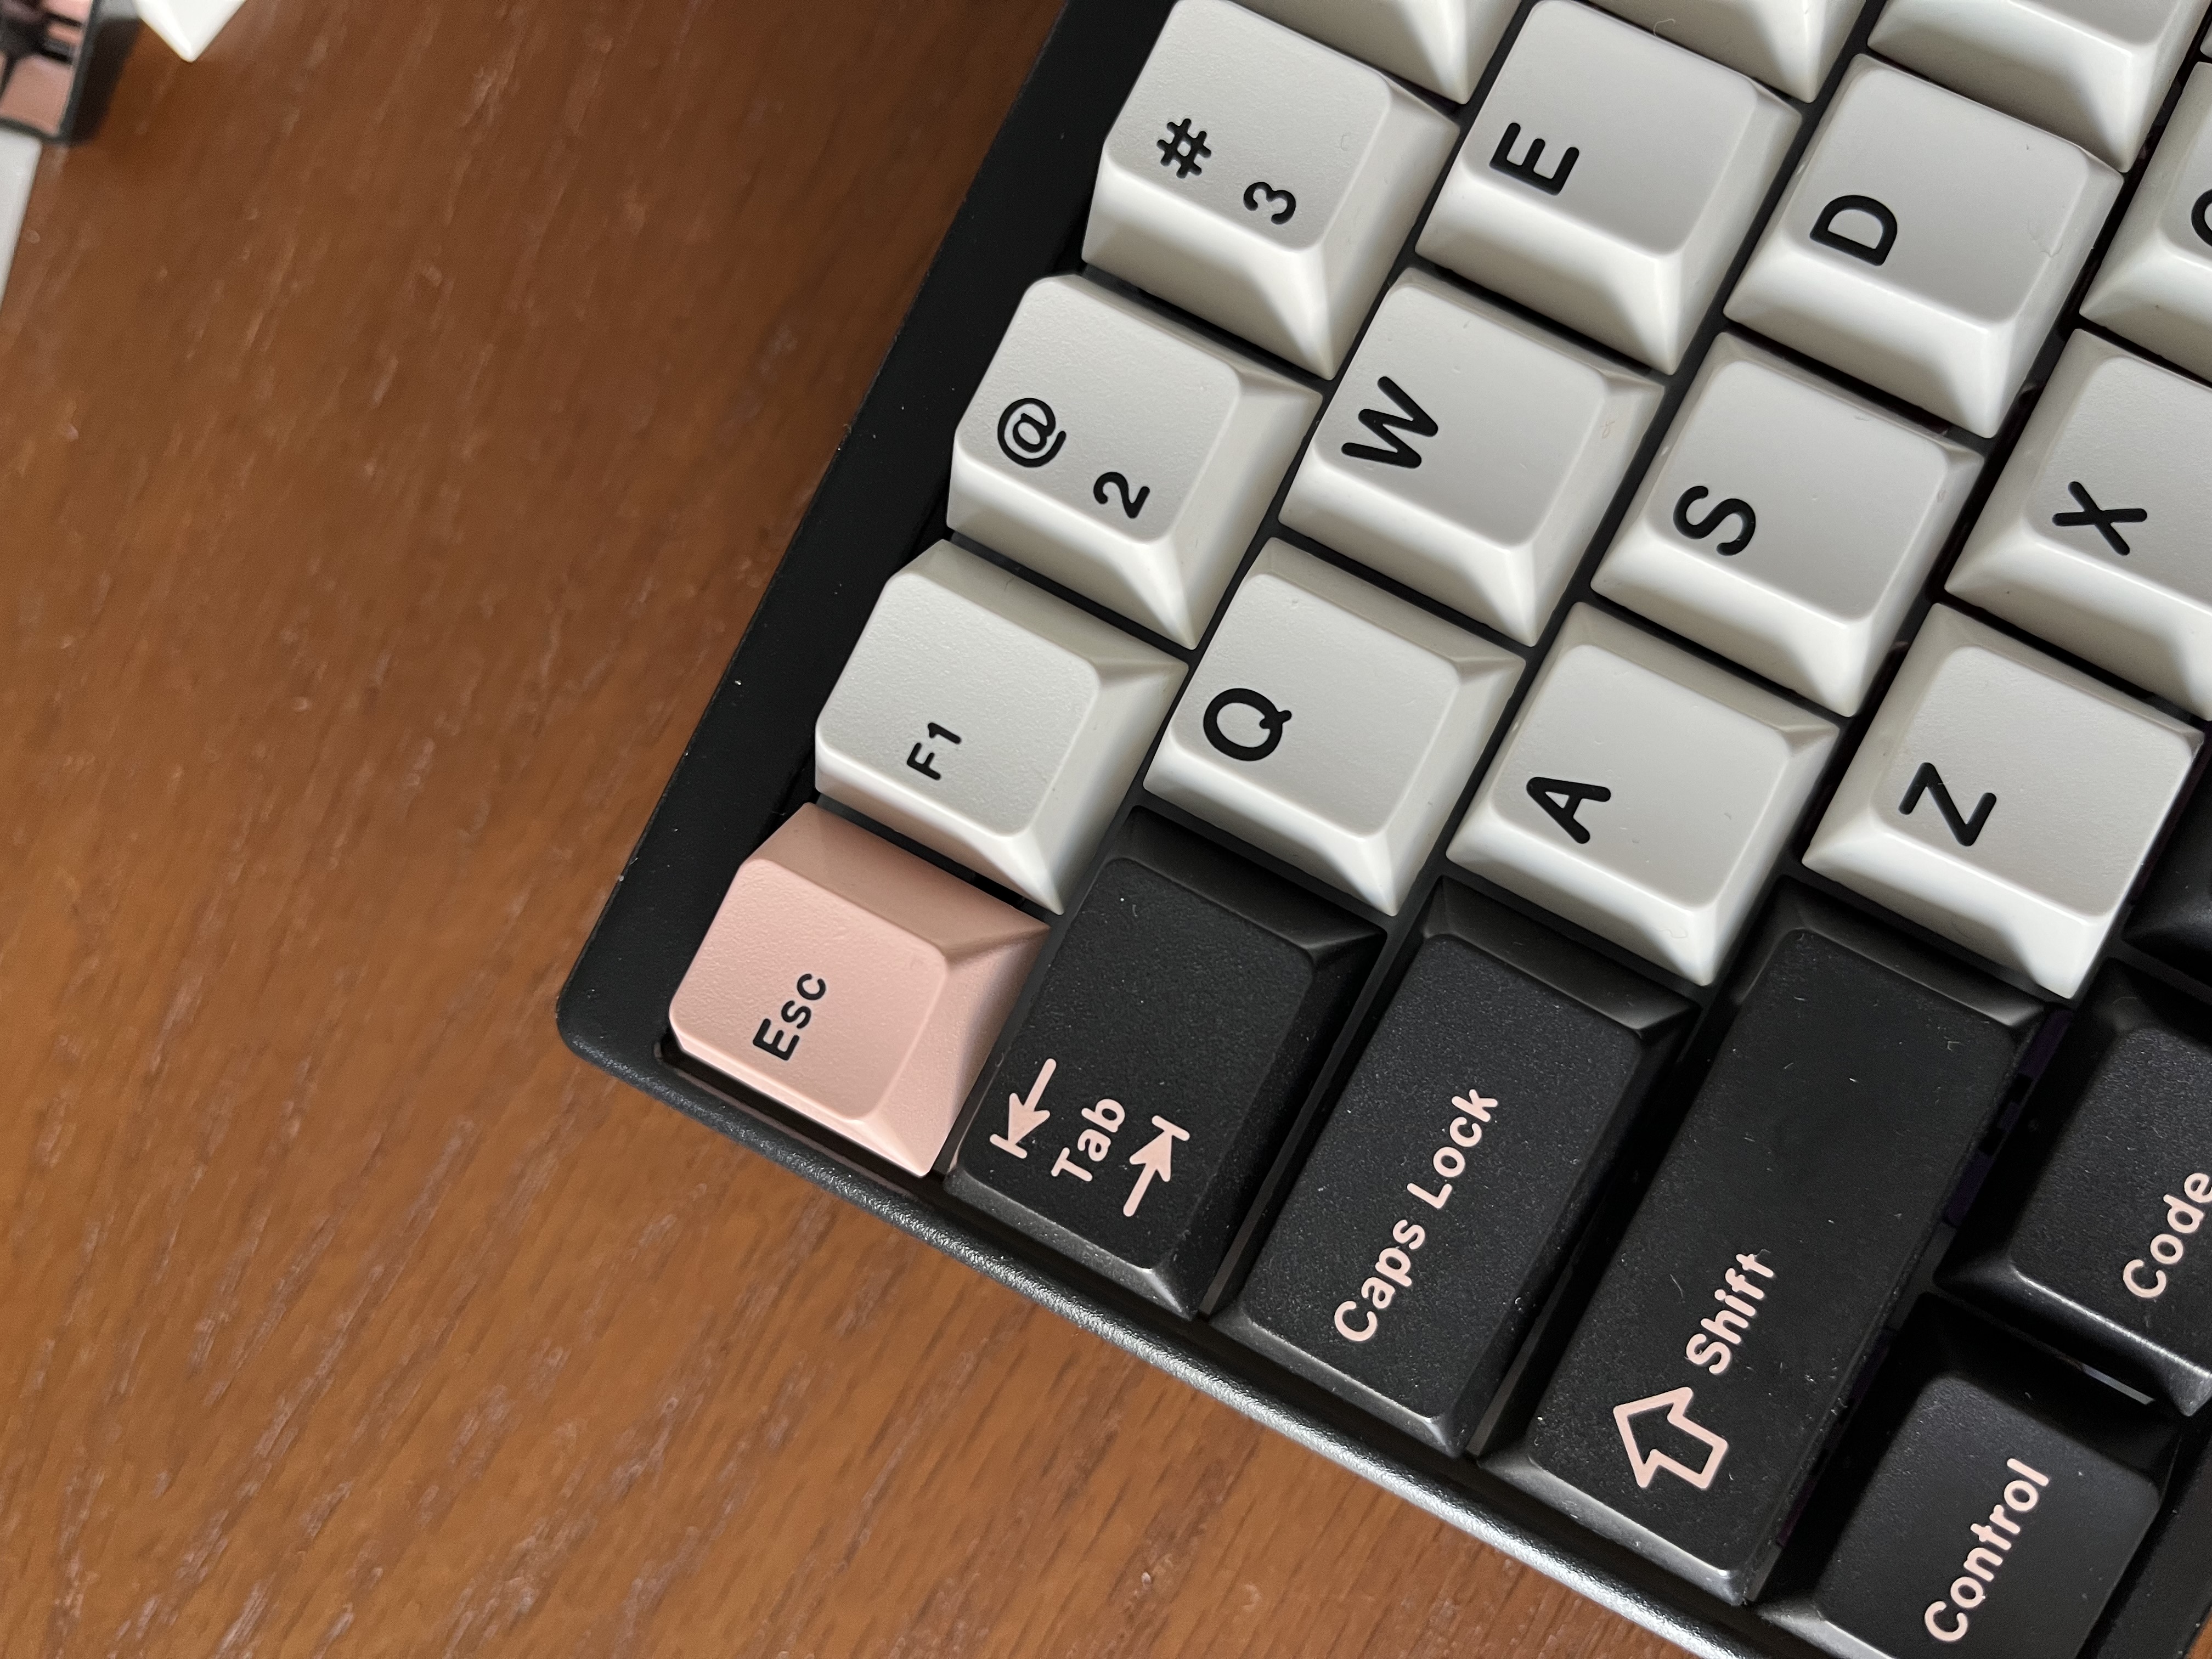 Keyboard with an F1 keycap in place of a proper 1 keycap.